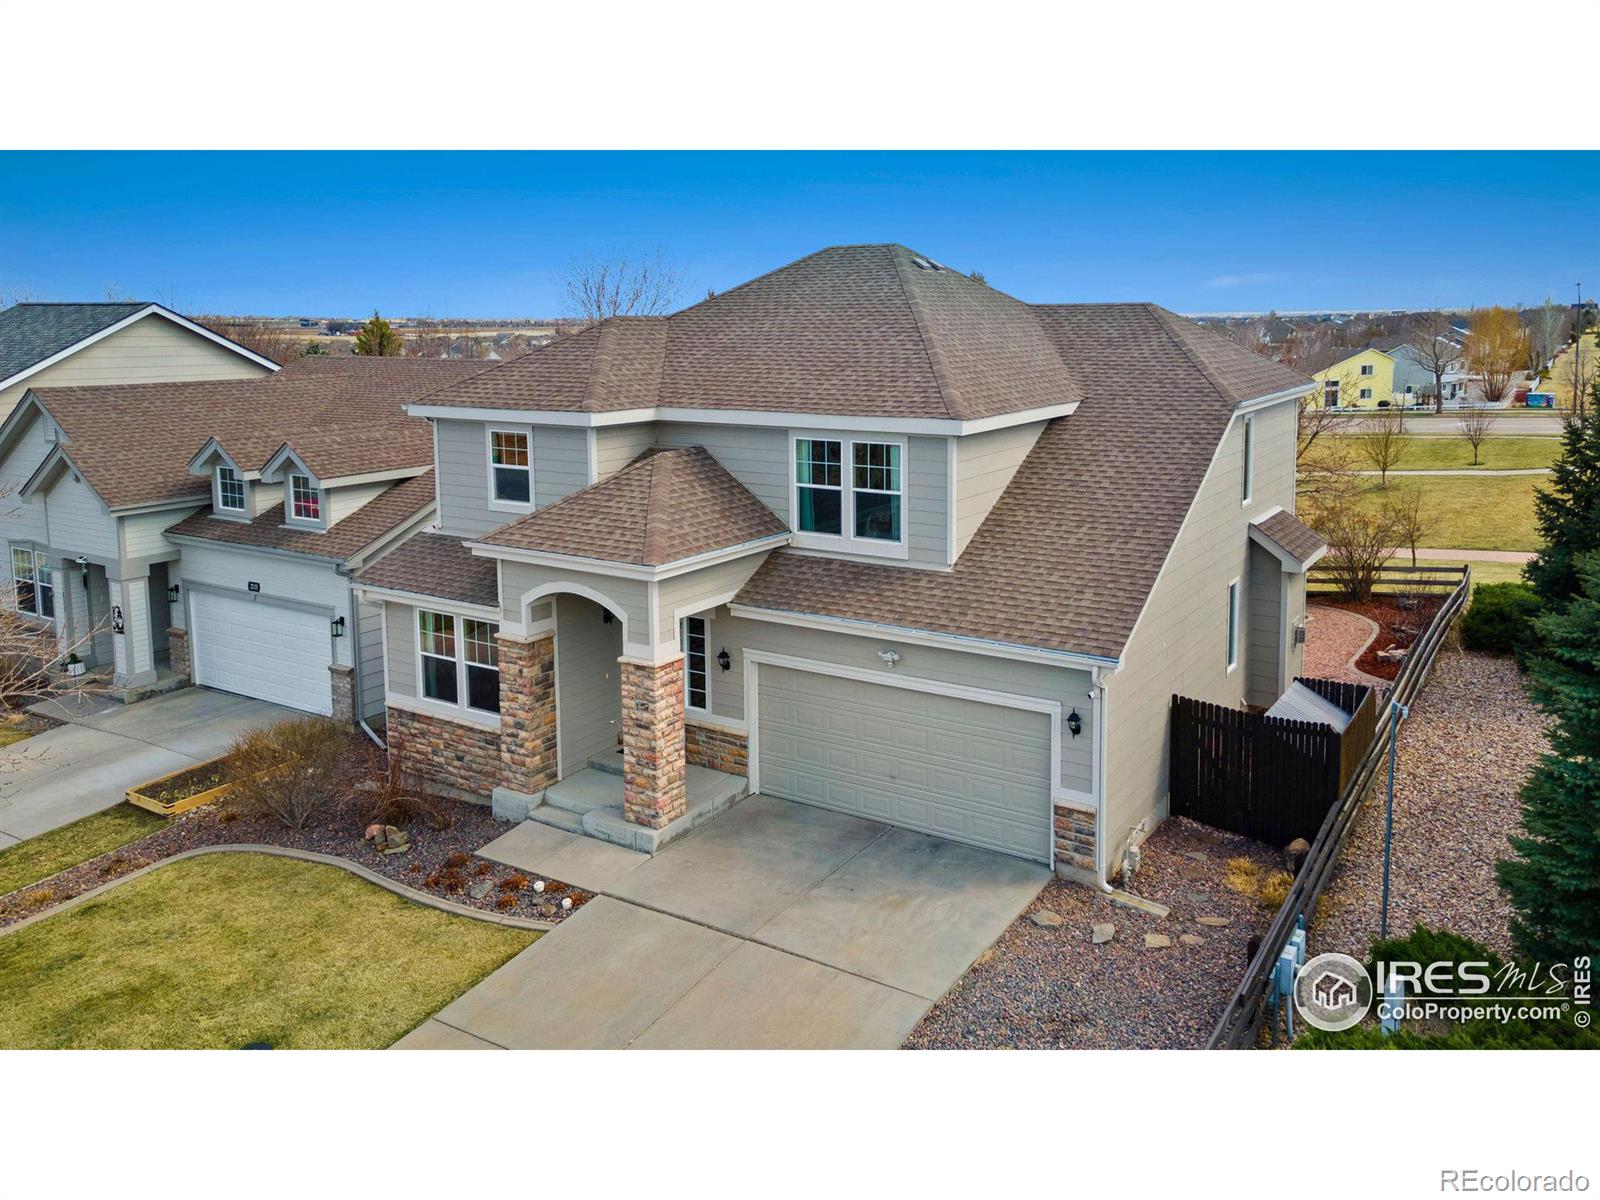 2109  Mainsail Drive, fort collins MLS: 4567891006431 Beds: 5 Baths: 4 Price: $600,000